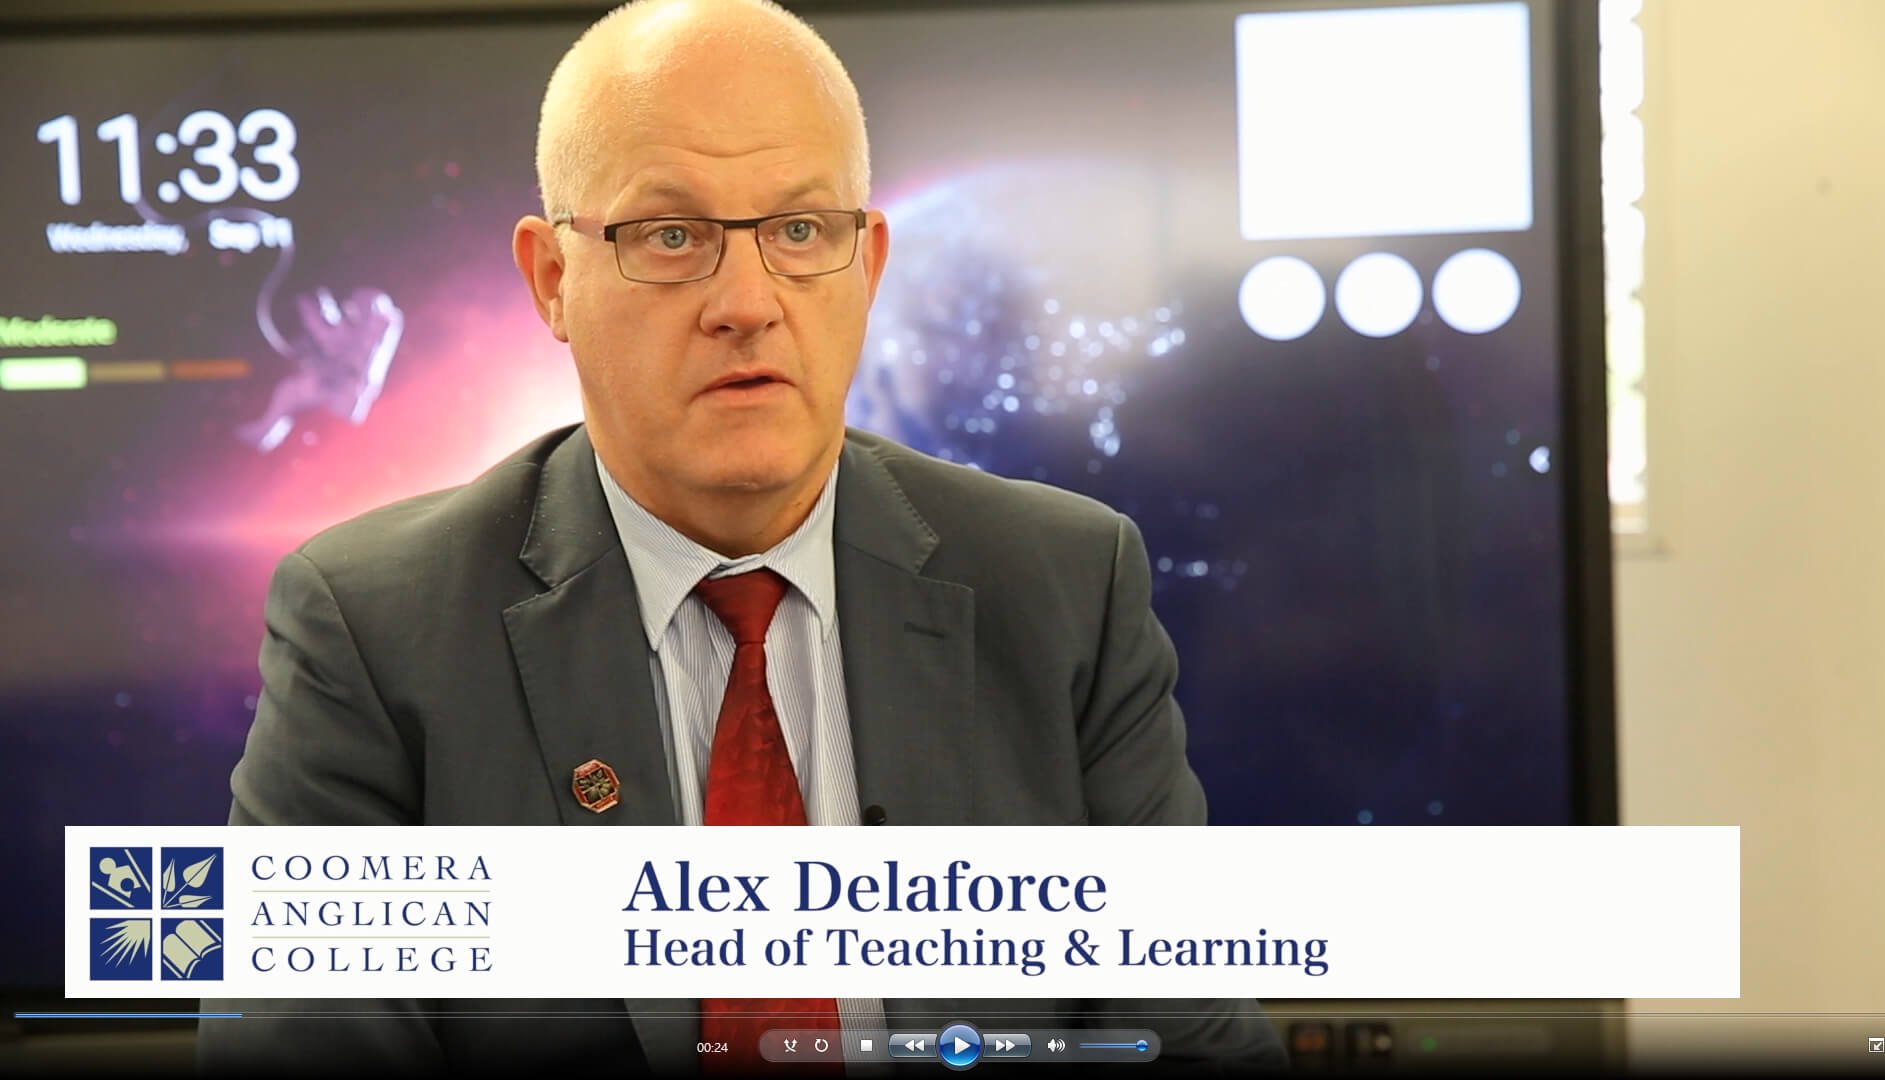 Alex Delaforce, Head of Teaching & Learning, Coomera Anglican College 